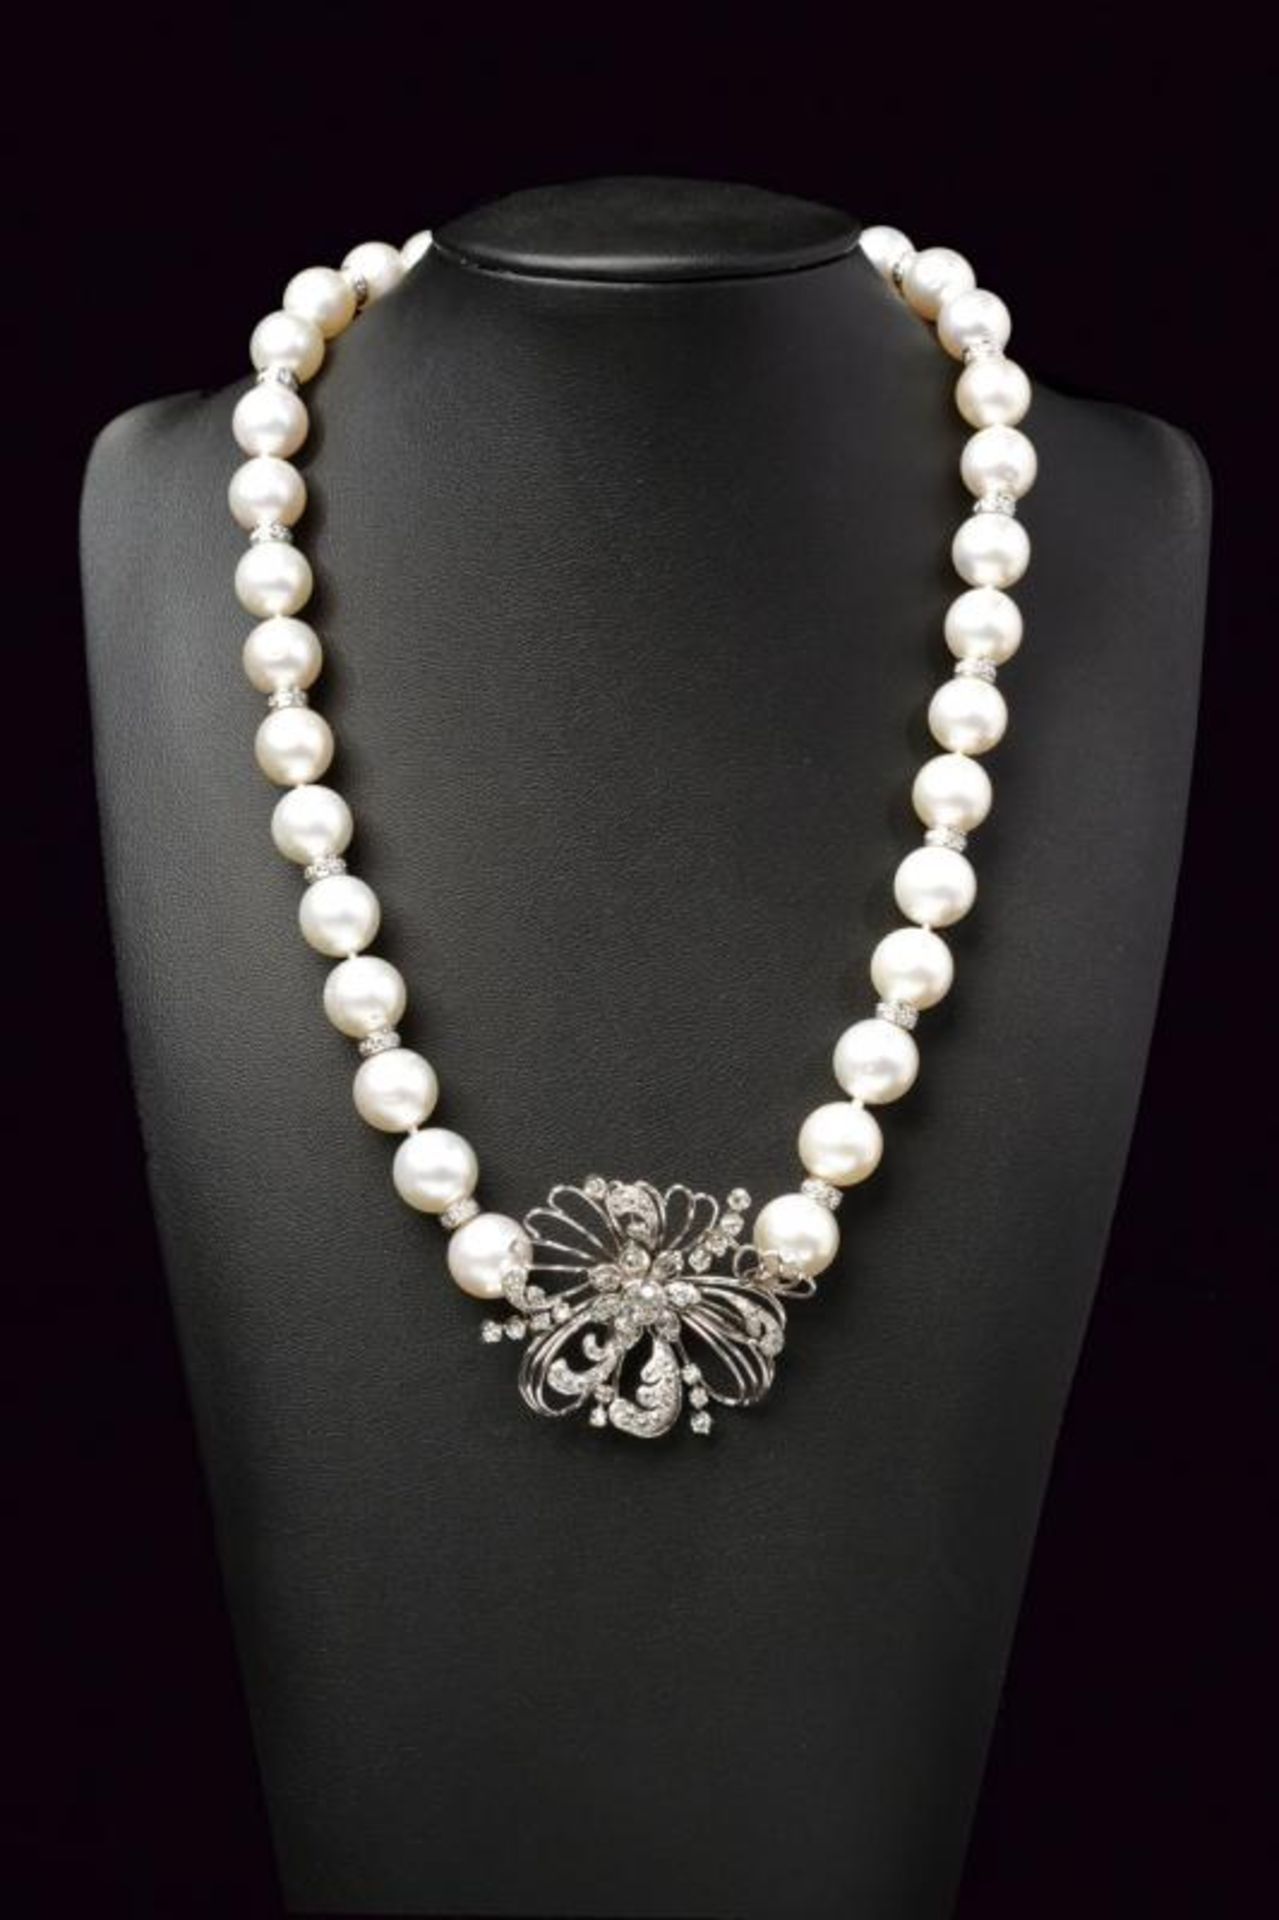 Australian pearl and diamond necklace - Image 3 of 3